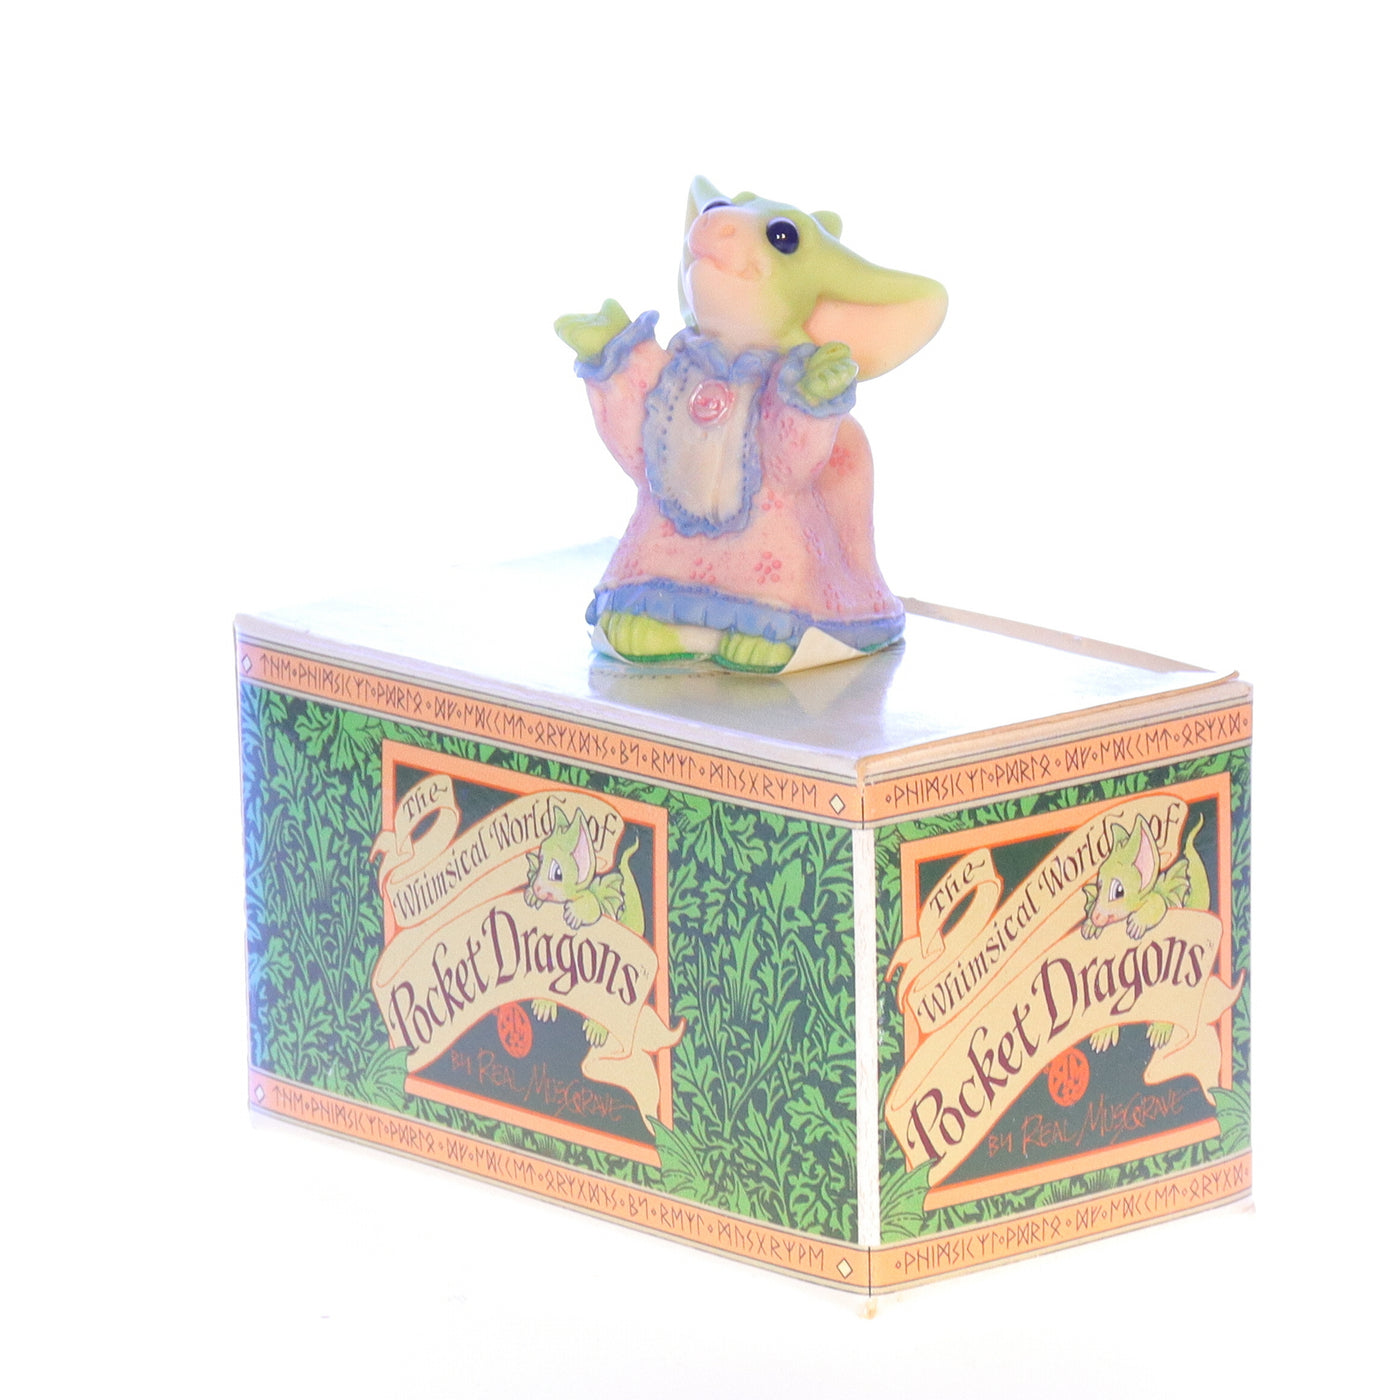 Whimsical_World_of_Pocket_Dragons_053839028998_Flannel_Nightie_Fantasy_Figurine_1998_Box Front Left View